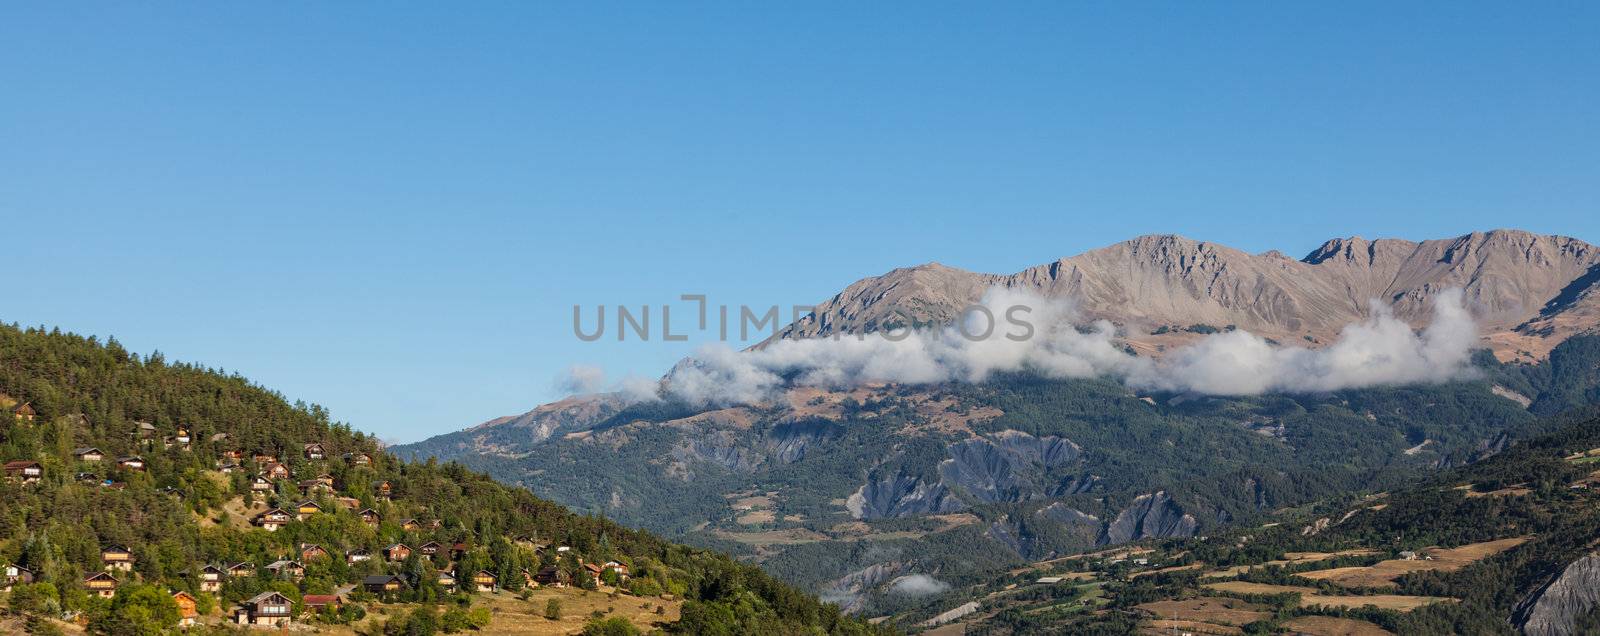 Image of a village located on a high altitude slope with forest in The Southern French Alps in Alpes-de-Haute-Provence region.